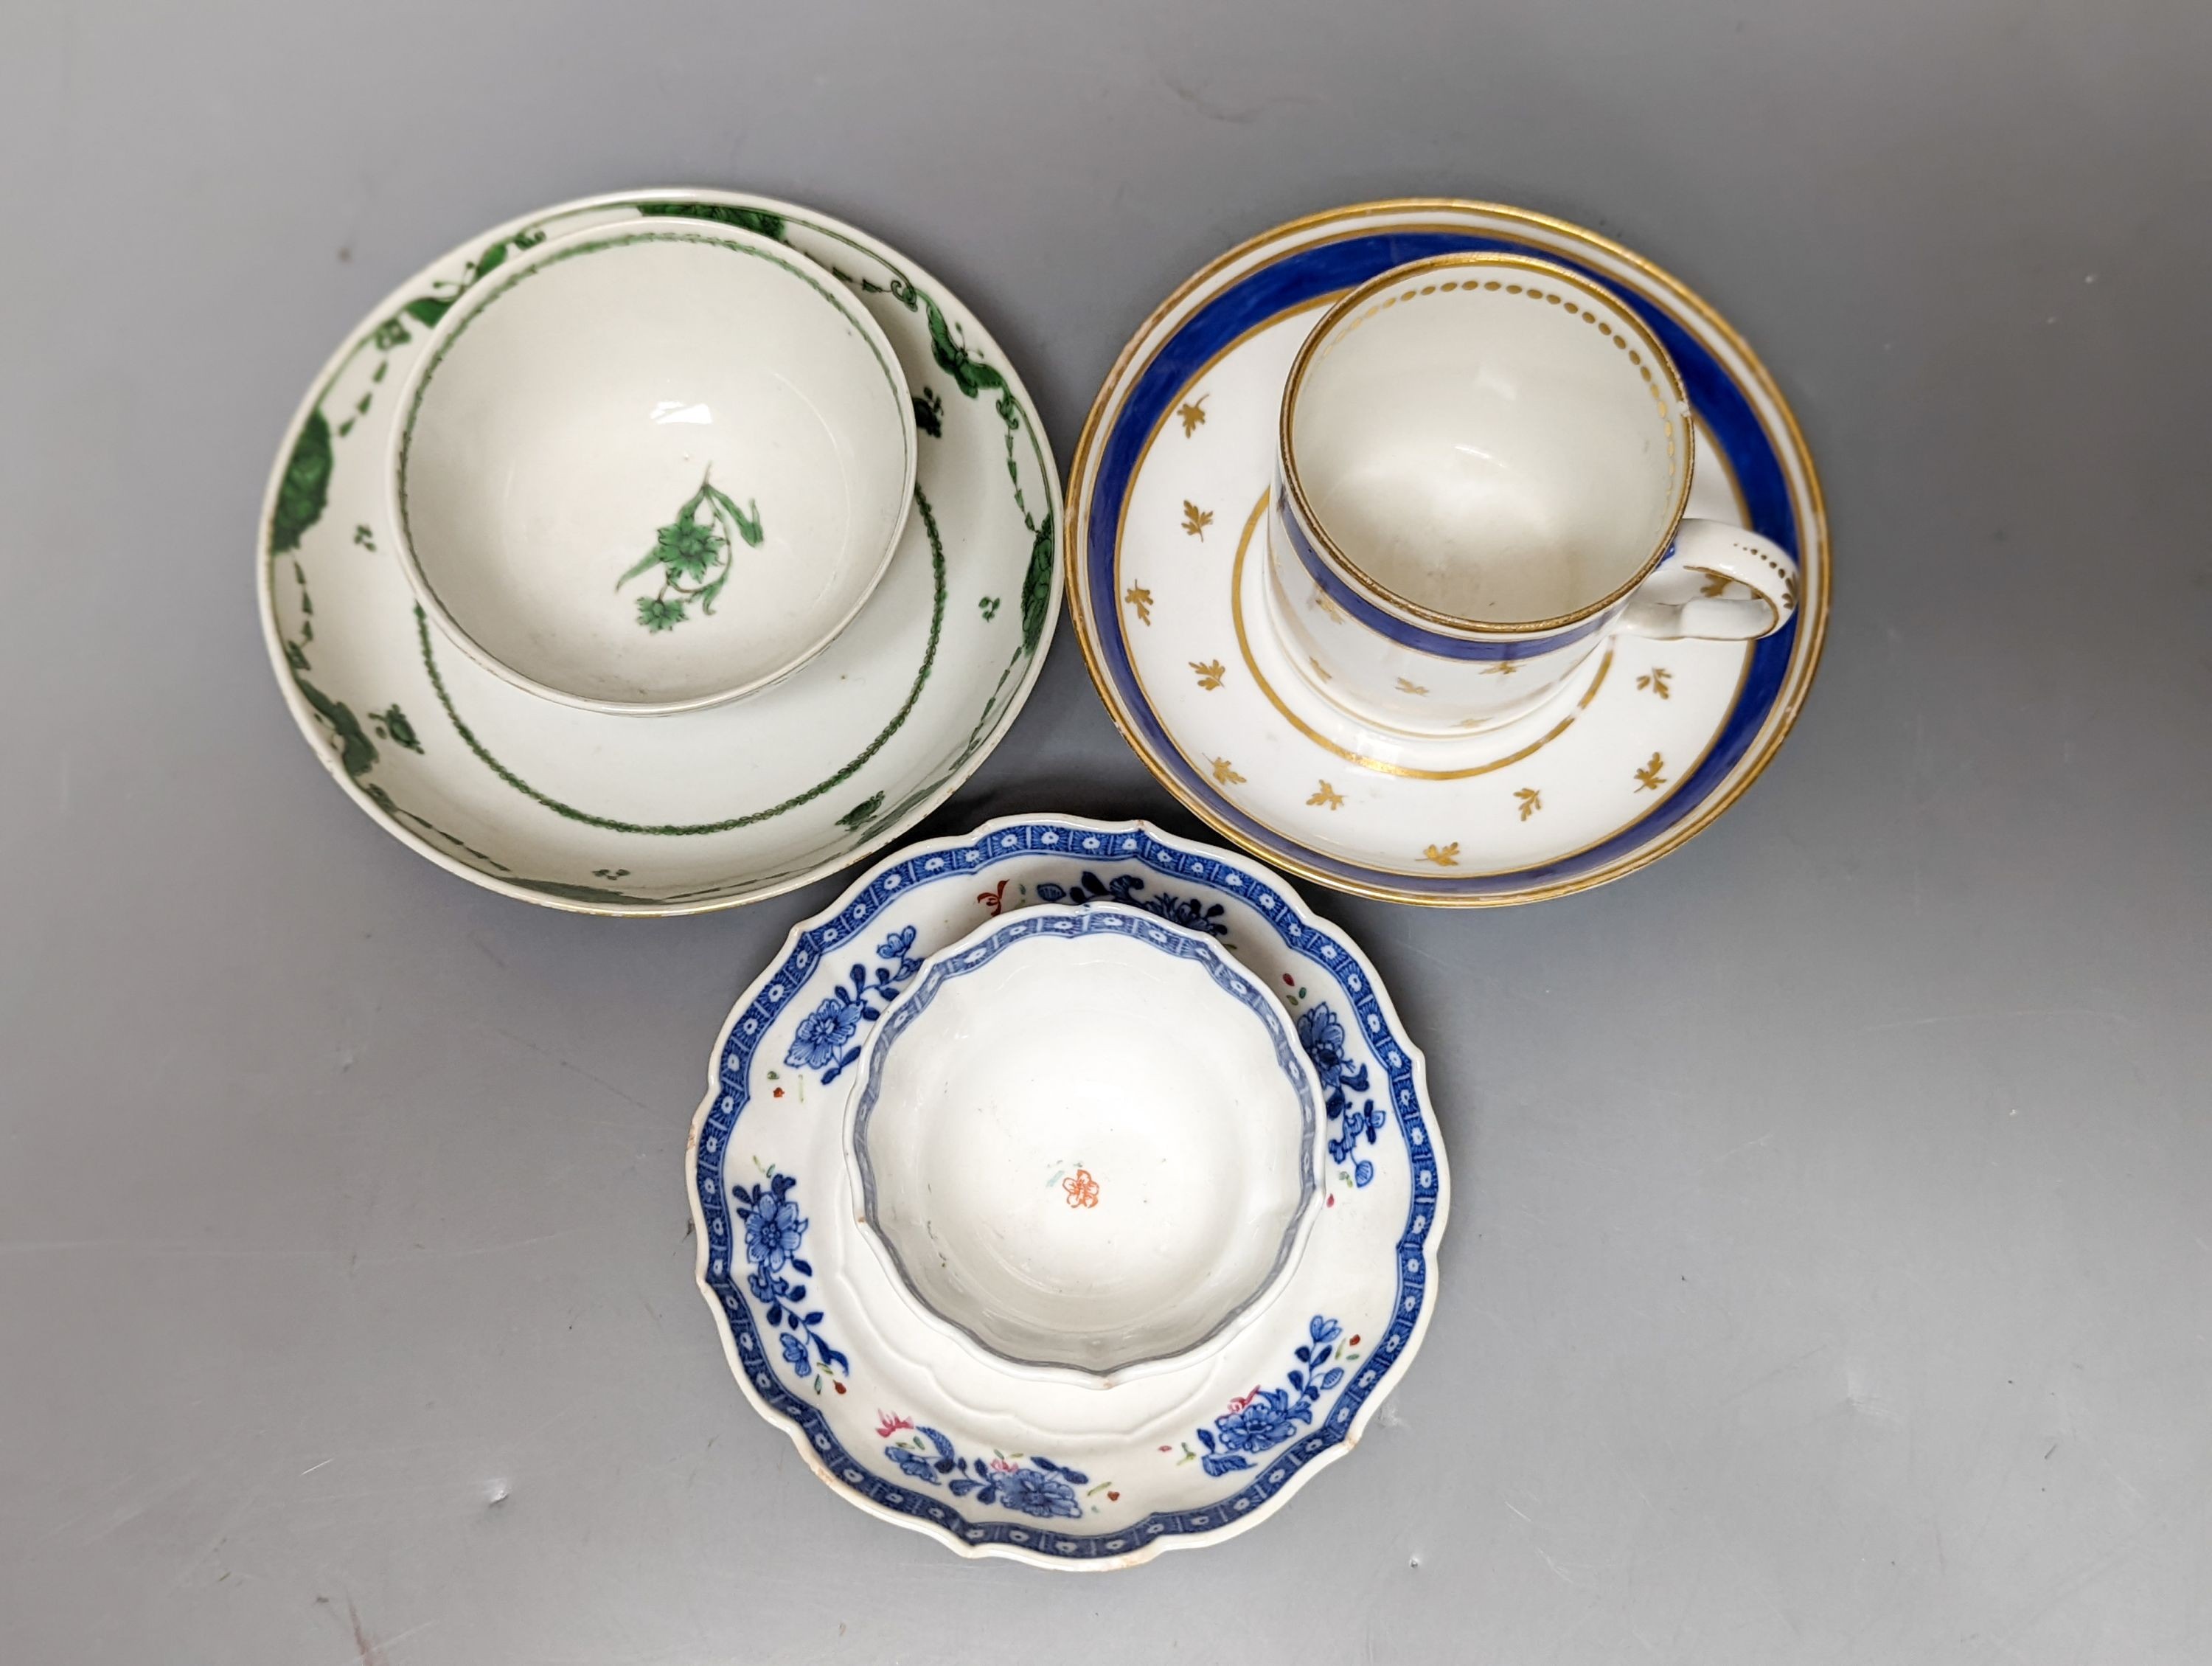 Two 18th century Chinese tea bowls, a 19th century German coffee can and saucer, a Spode coffee can and another